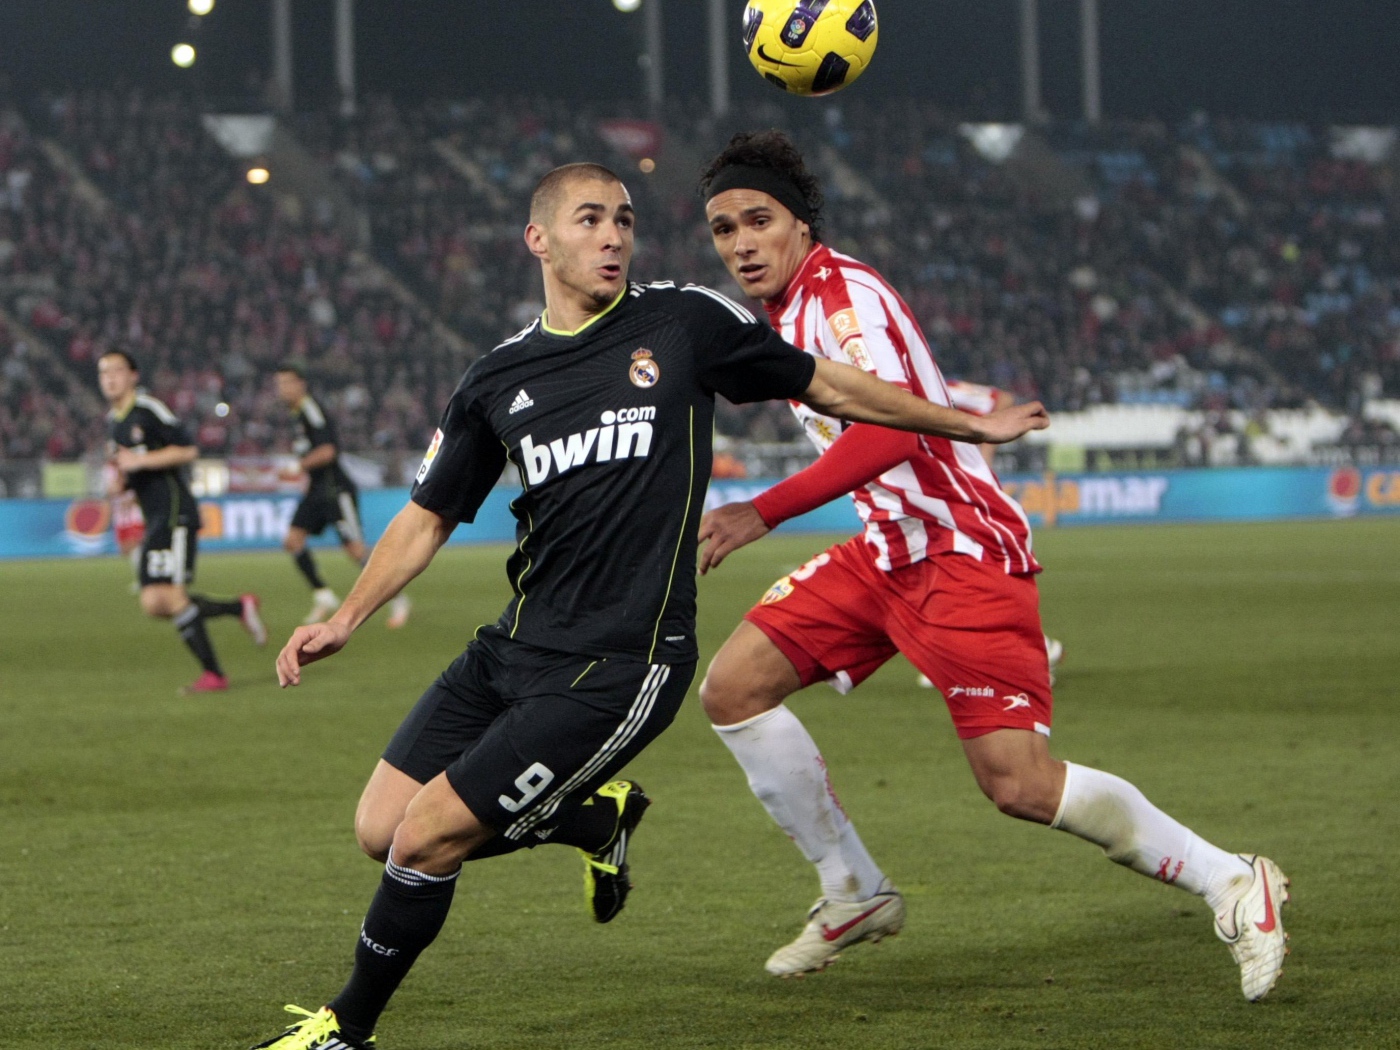 The forward of Real Madrid Karim Benzema is fighting for the ball